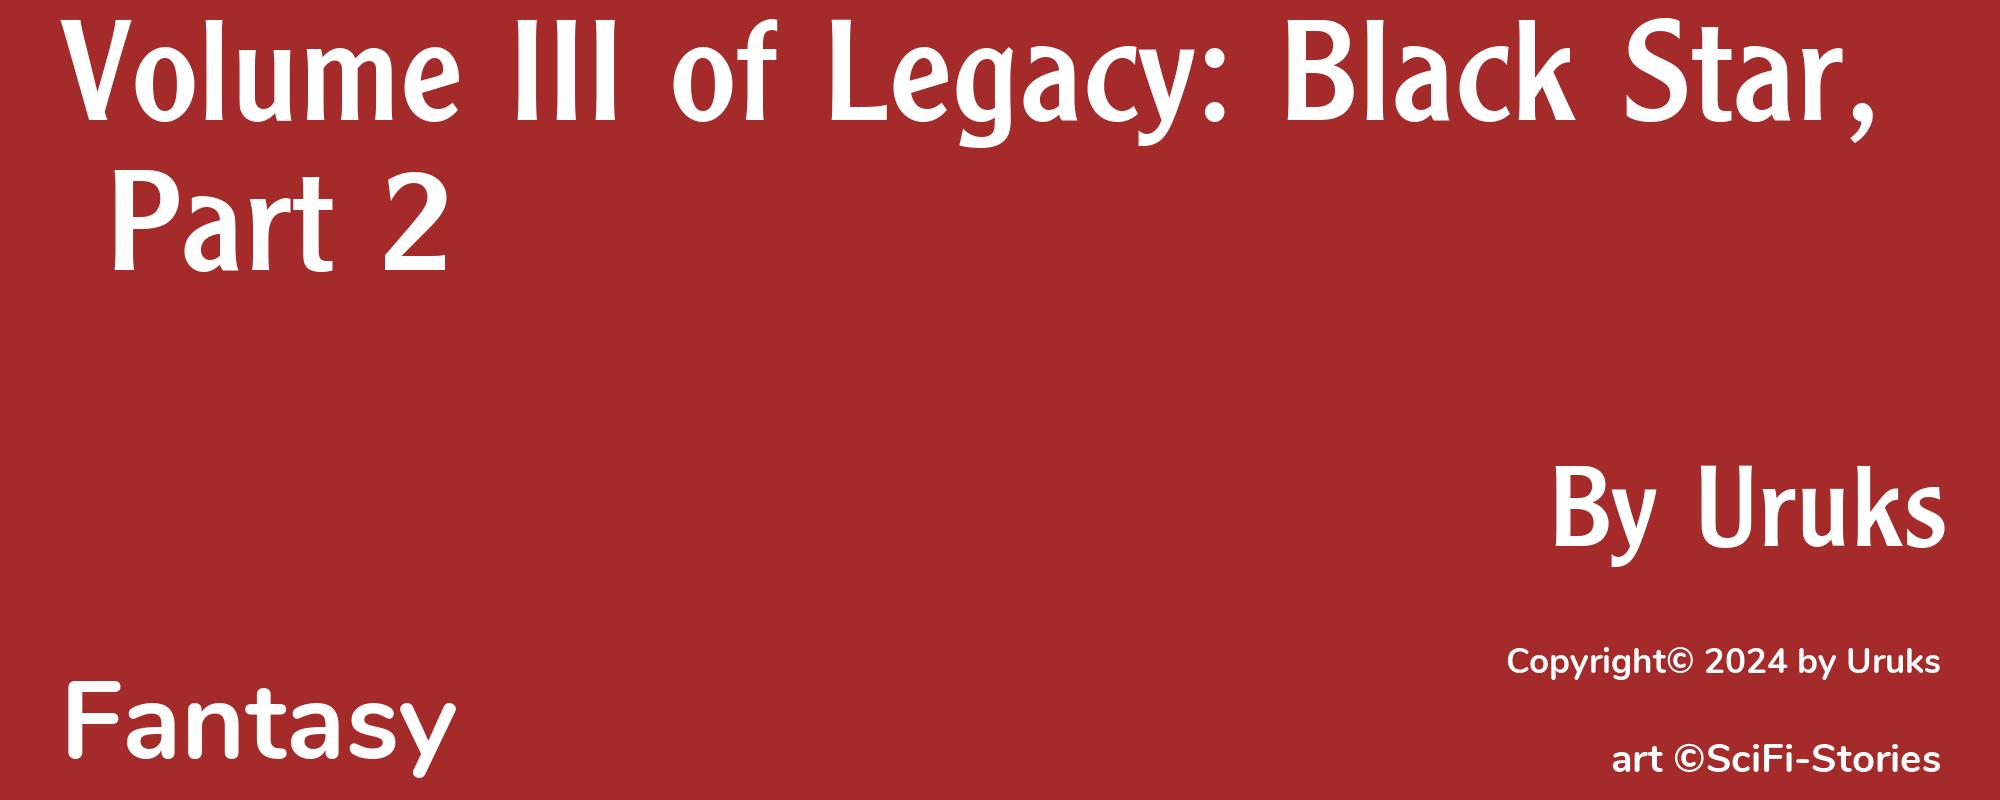 Volume III of Legacy: Black Star, Part 2 - Cover